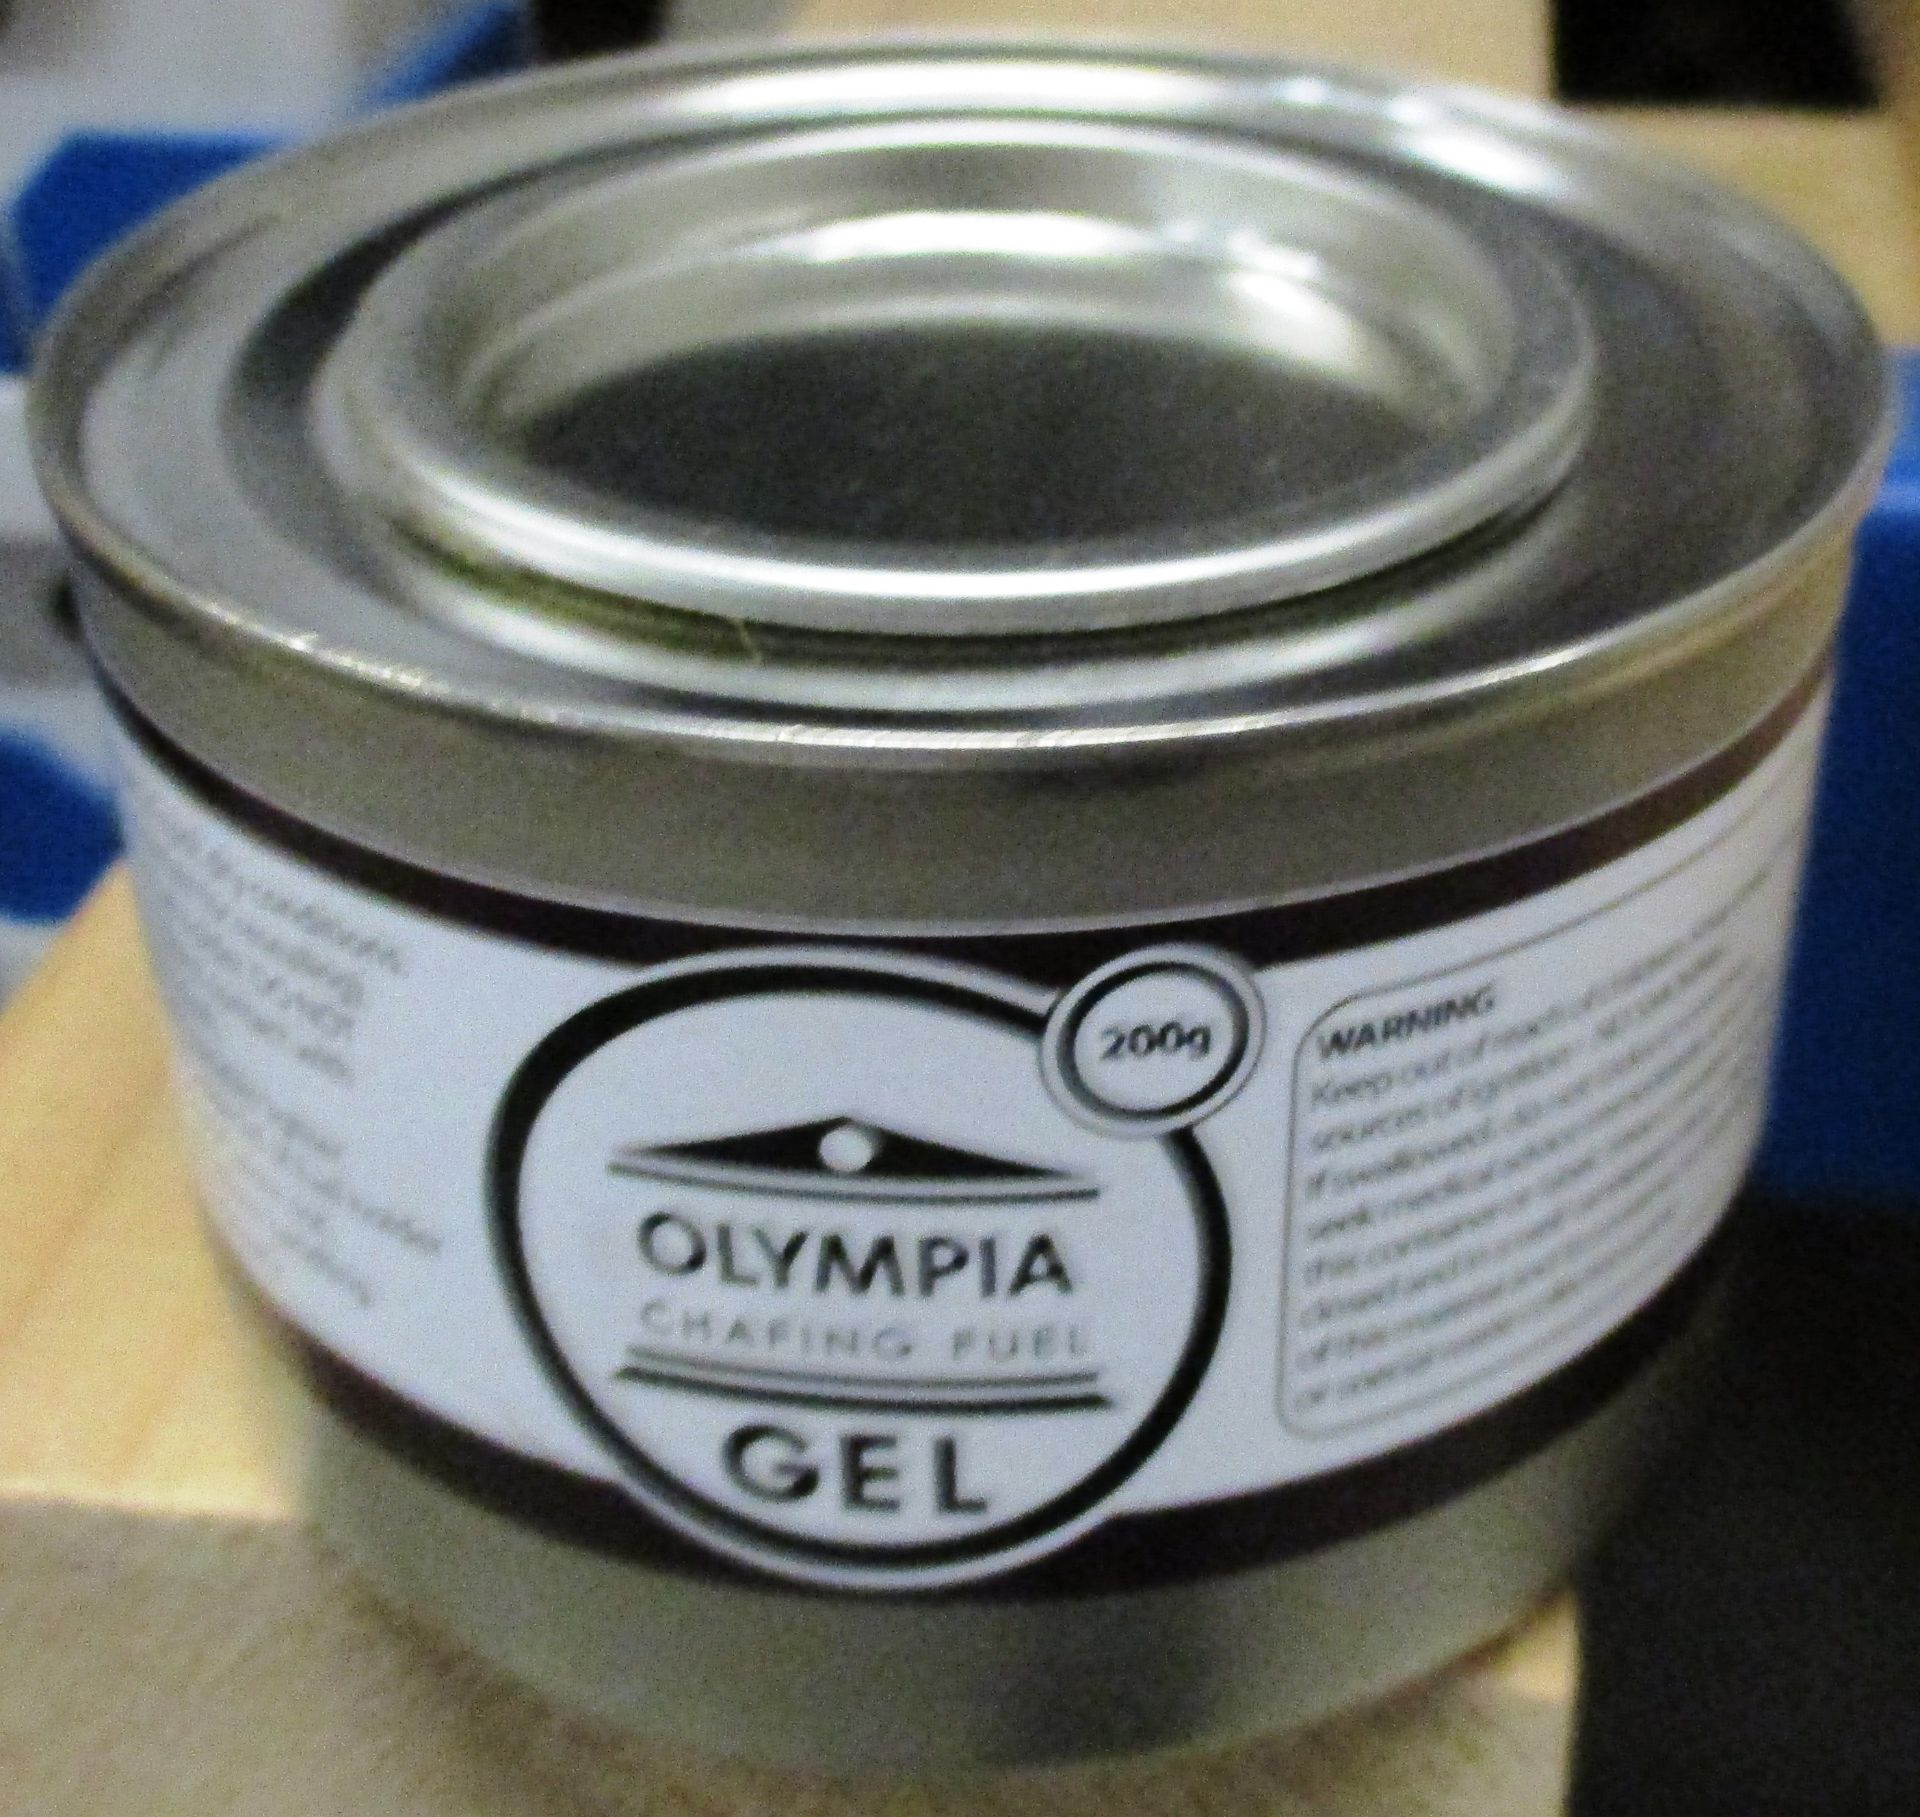 48 x 200g tins of Olympia chafing fuel gel